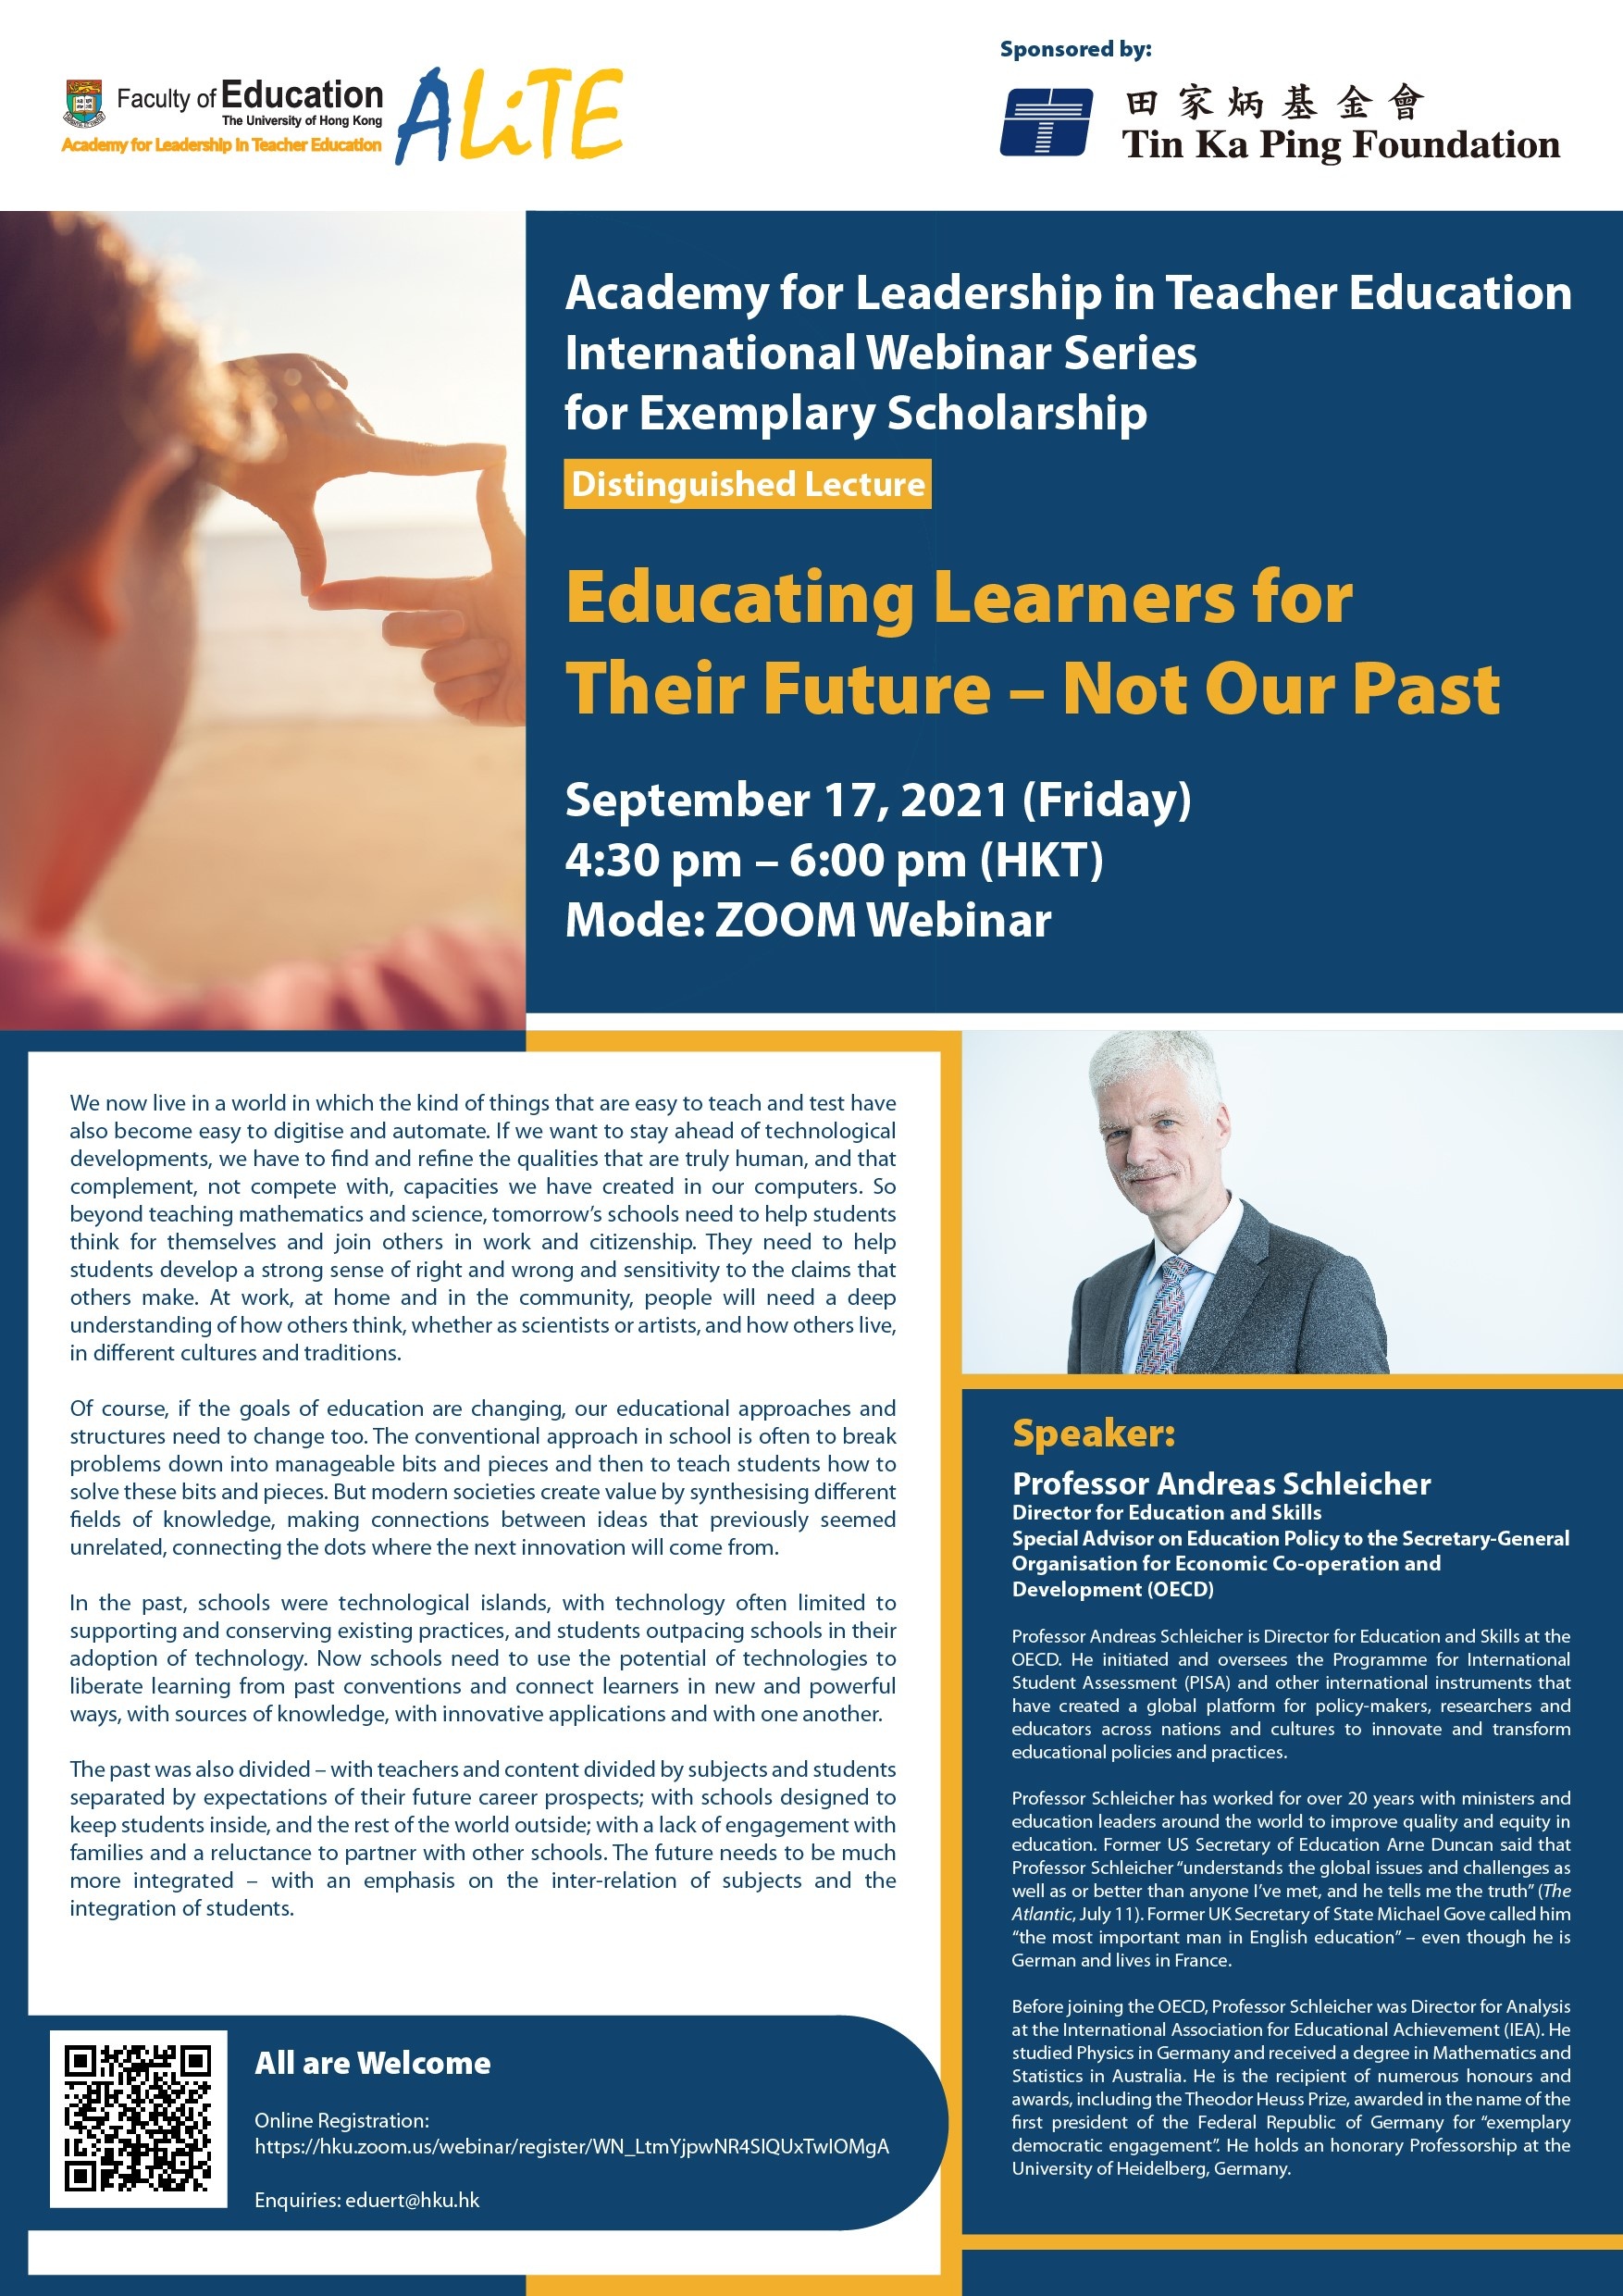 ALITE International Webinar Series for Exemplary Scholarship by Professor Schleicher, Director for Education and Skills, OECD